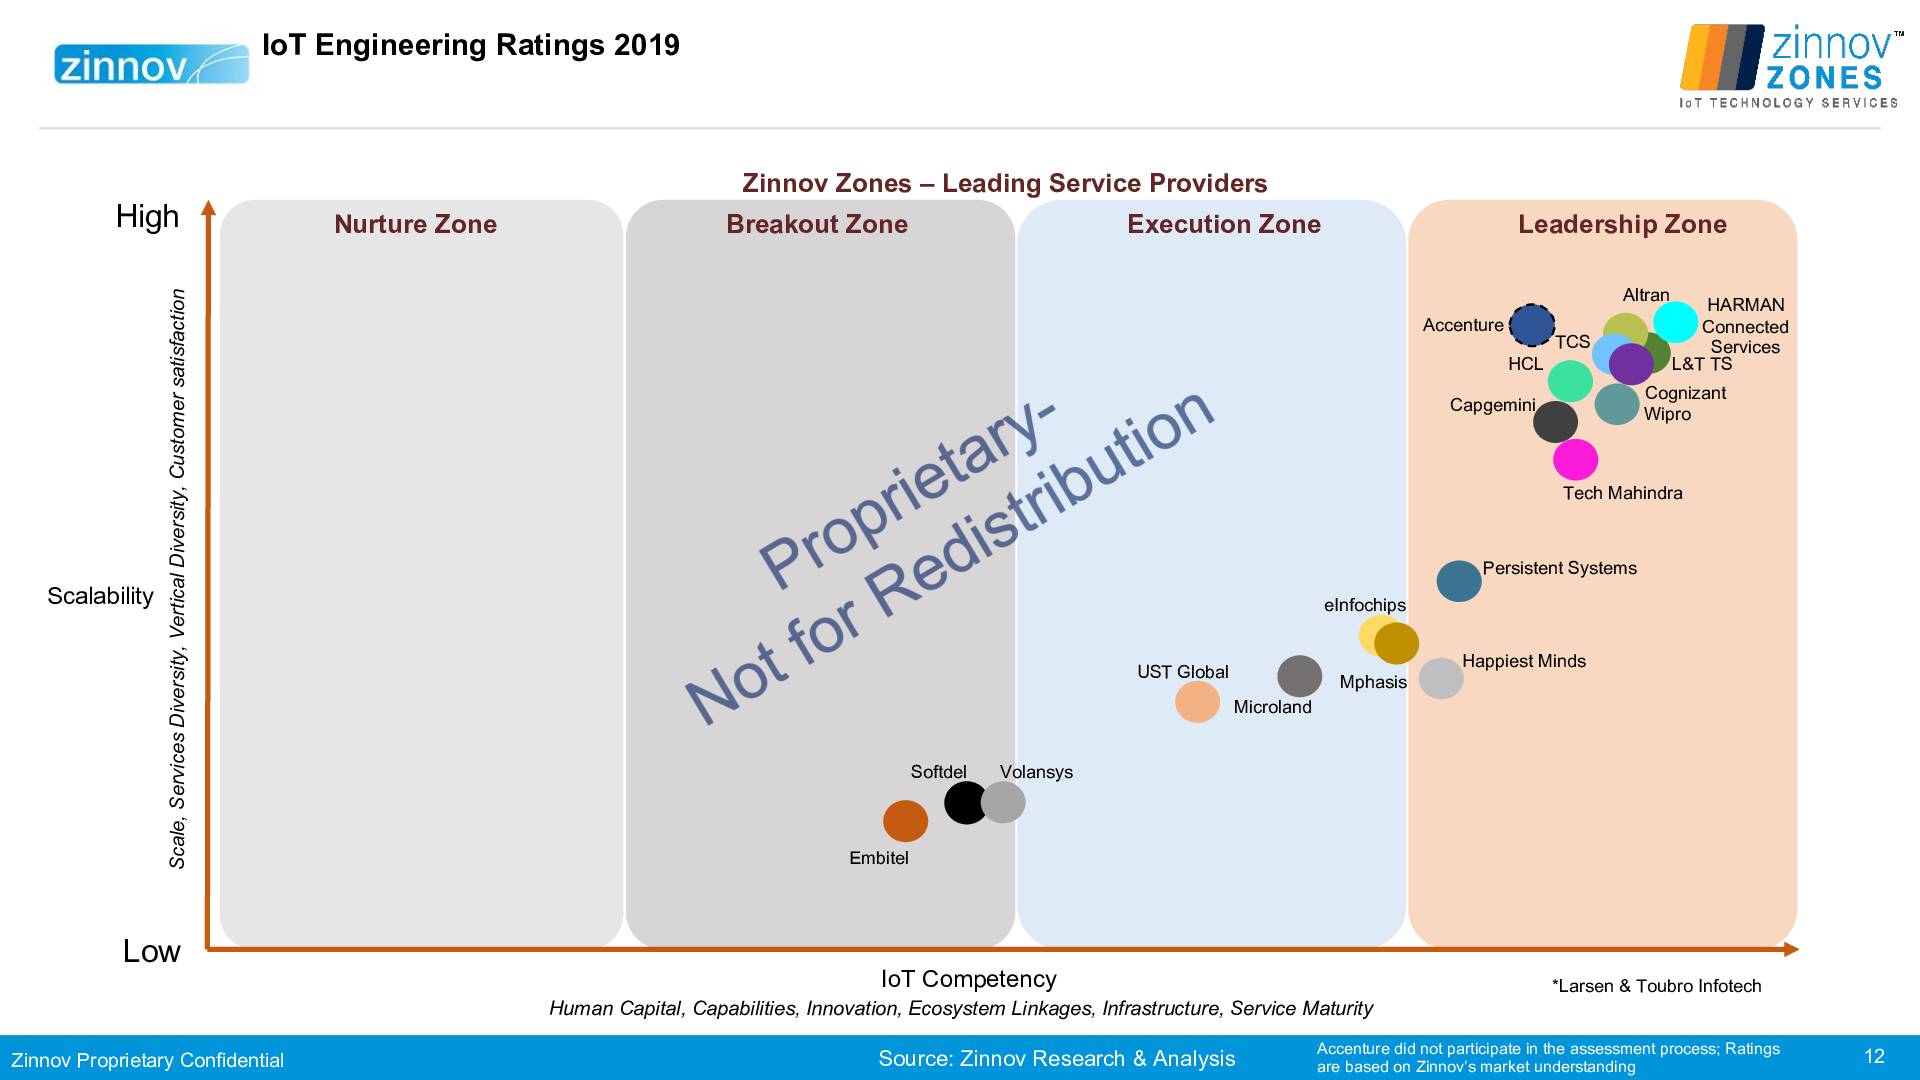 Zinnov Zones Iot Technology Services 2019 Ratings12